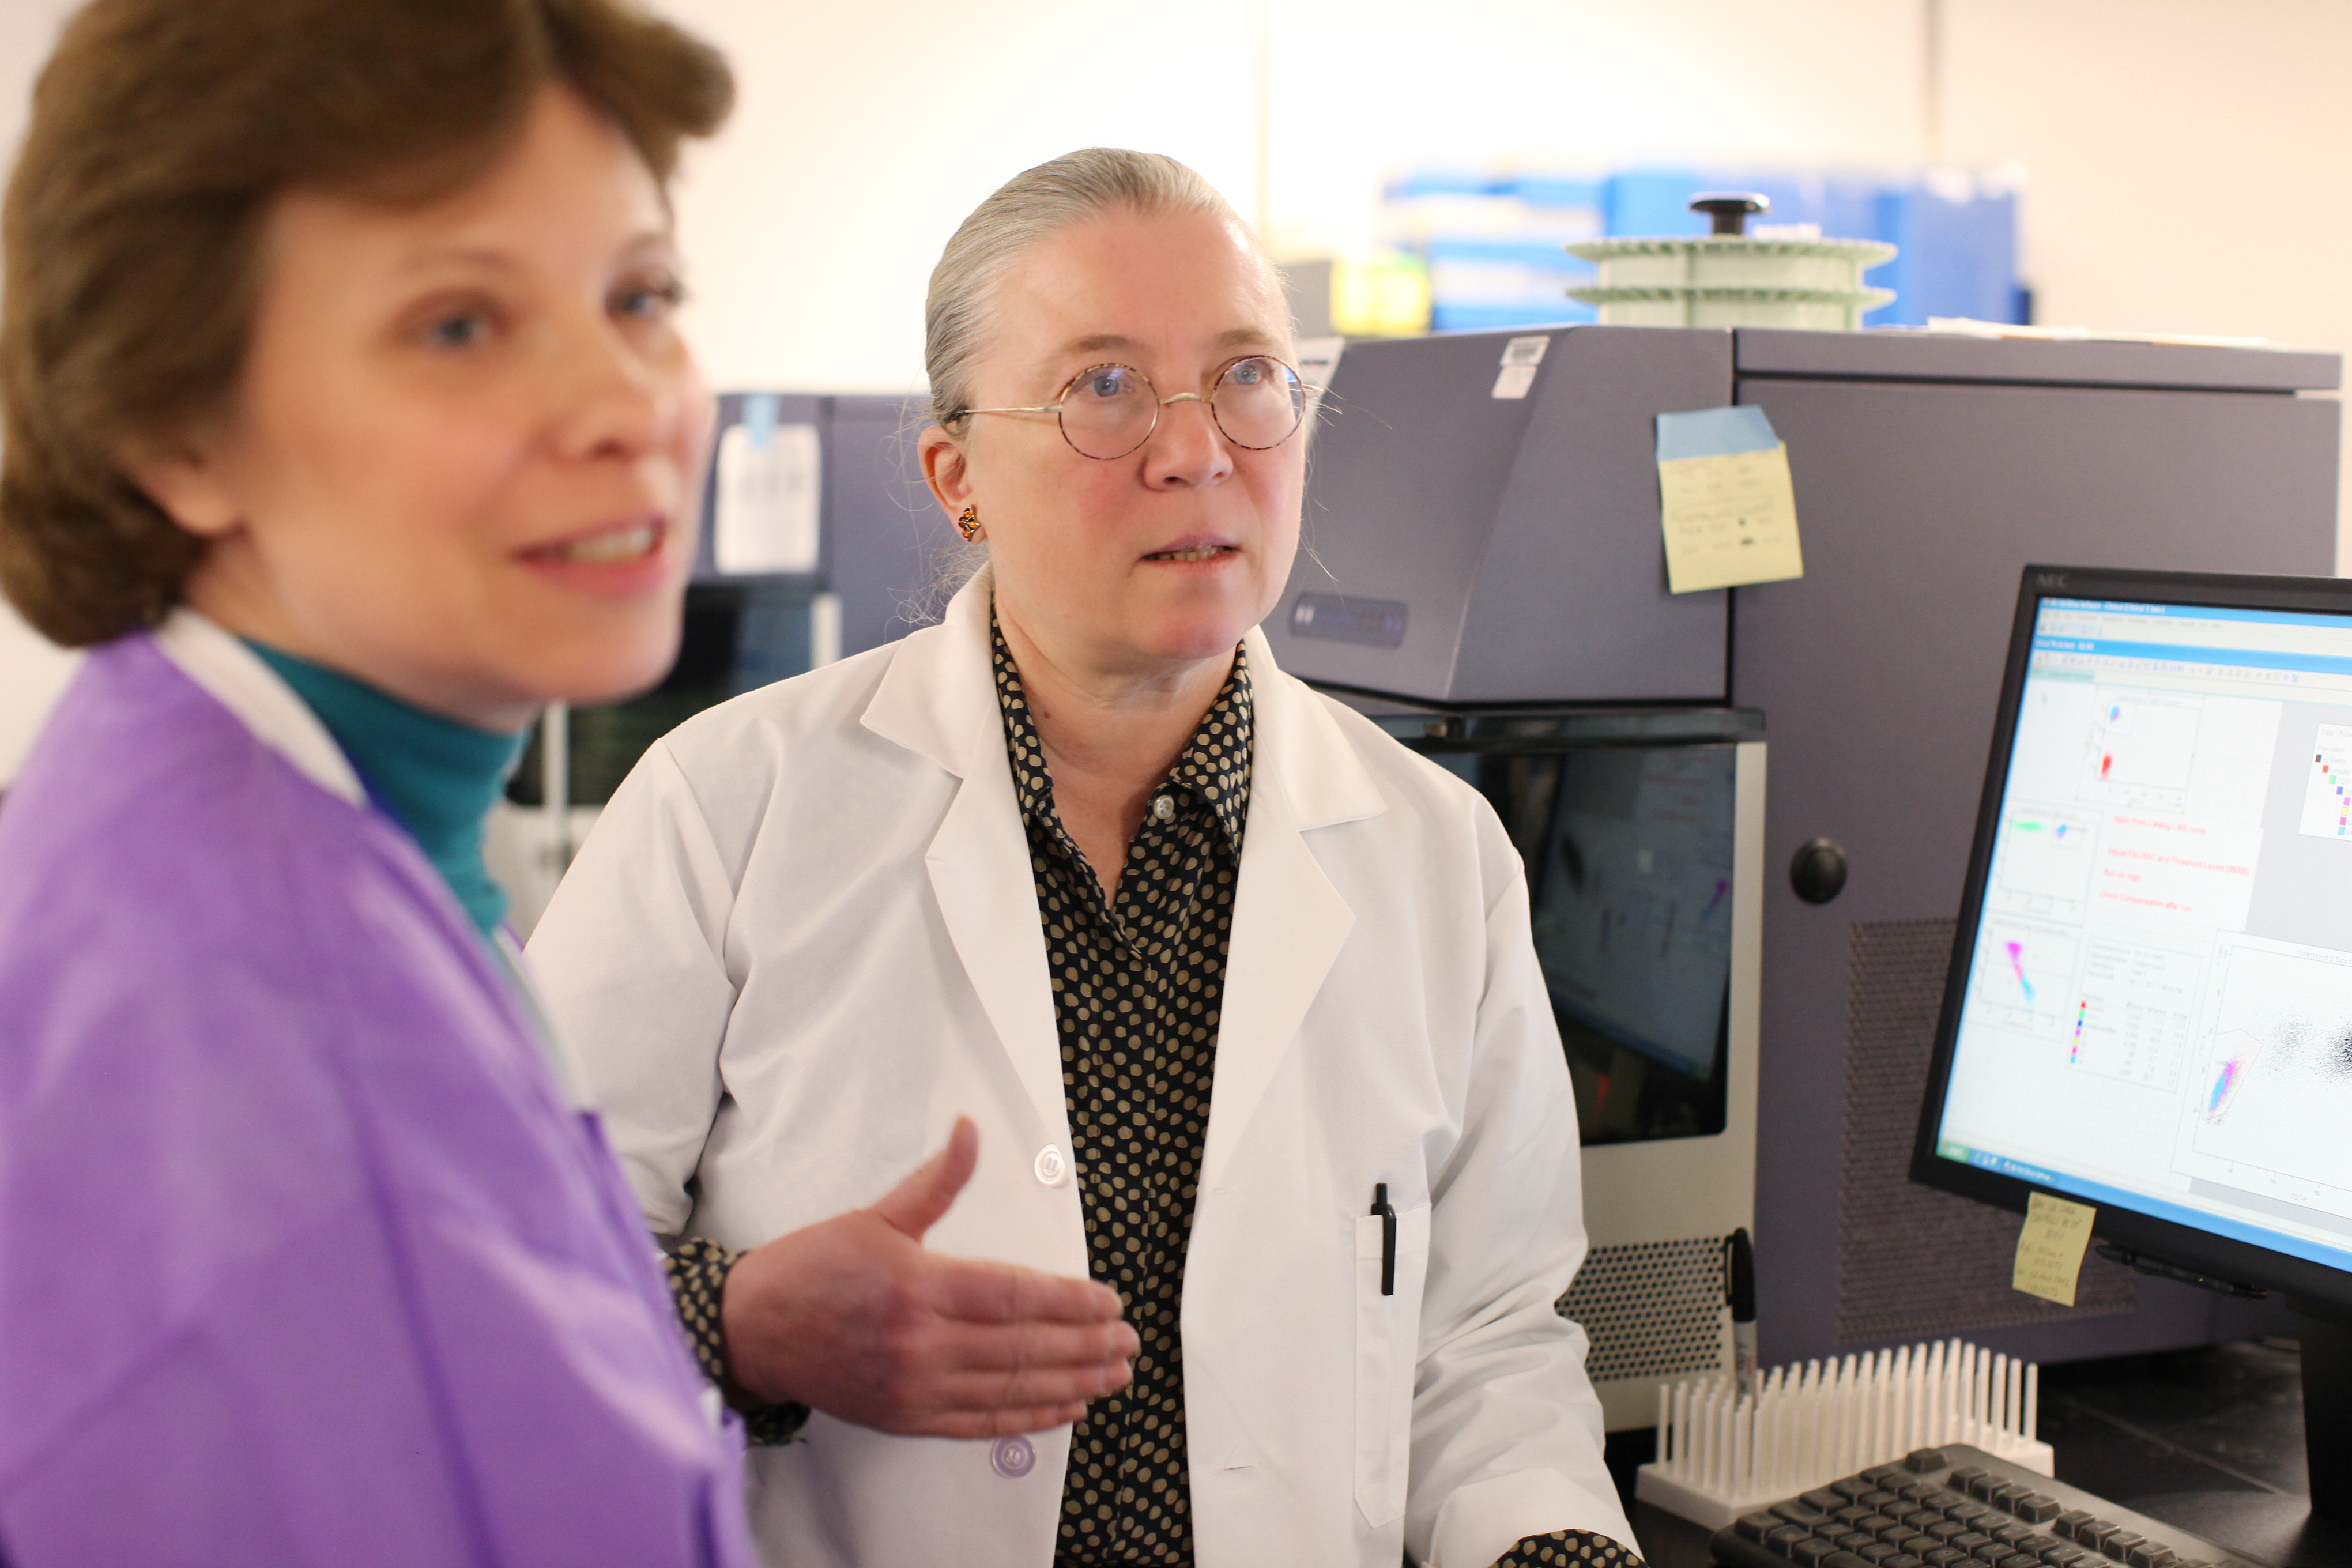 Lisa Filipovich, MD, shown in a white lab coat, consults with colleagues in her lab at Cincinnati Children's